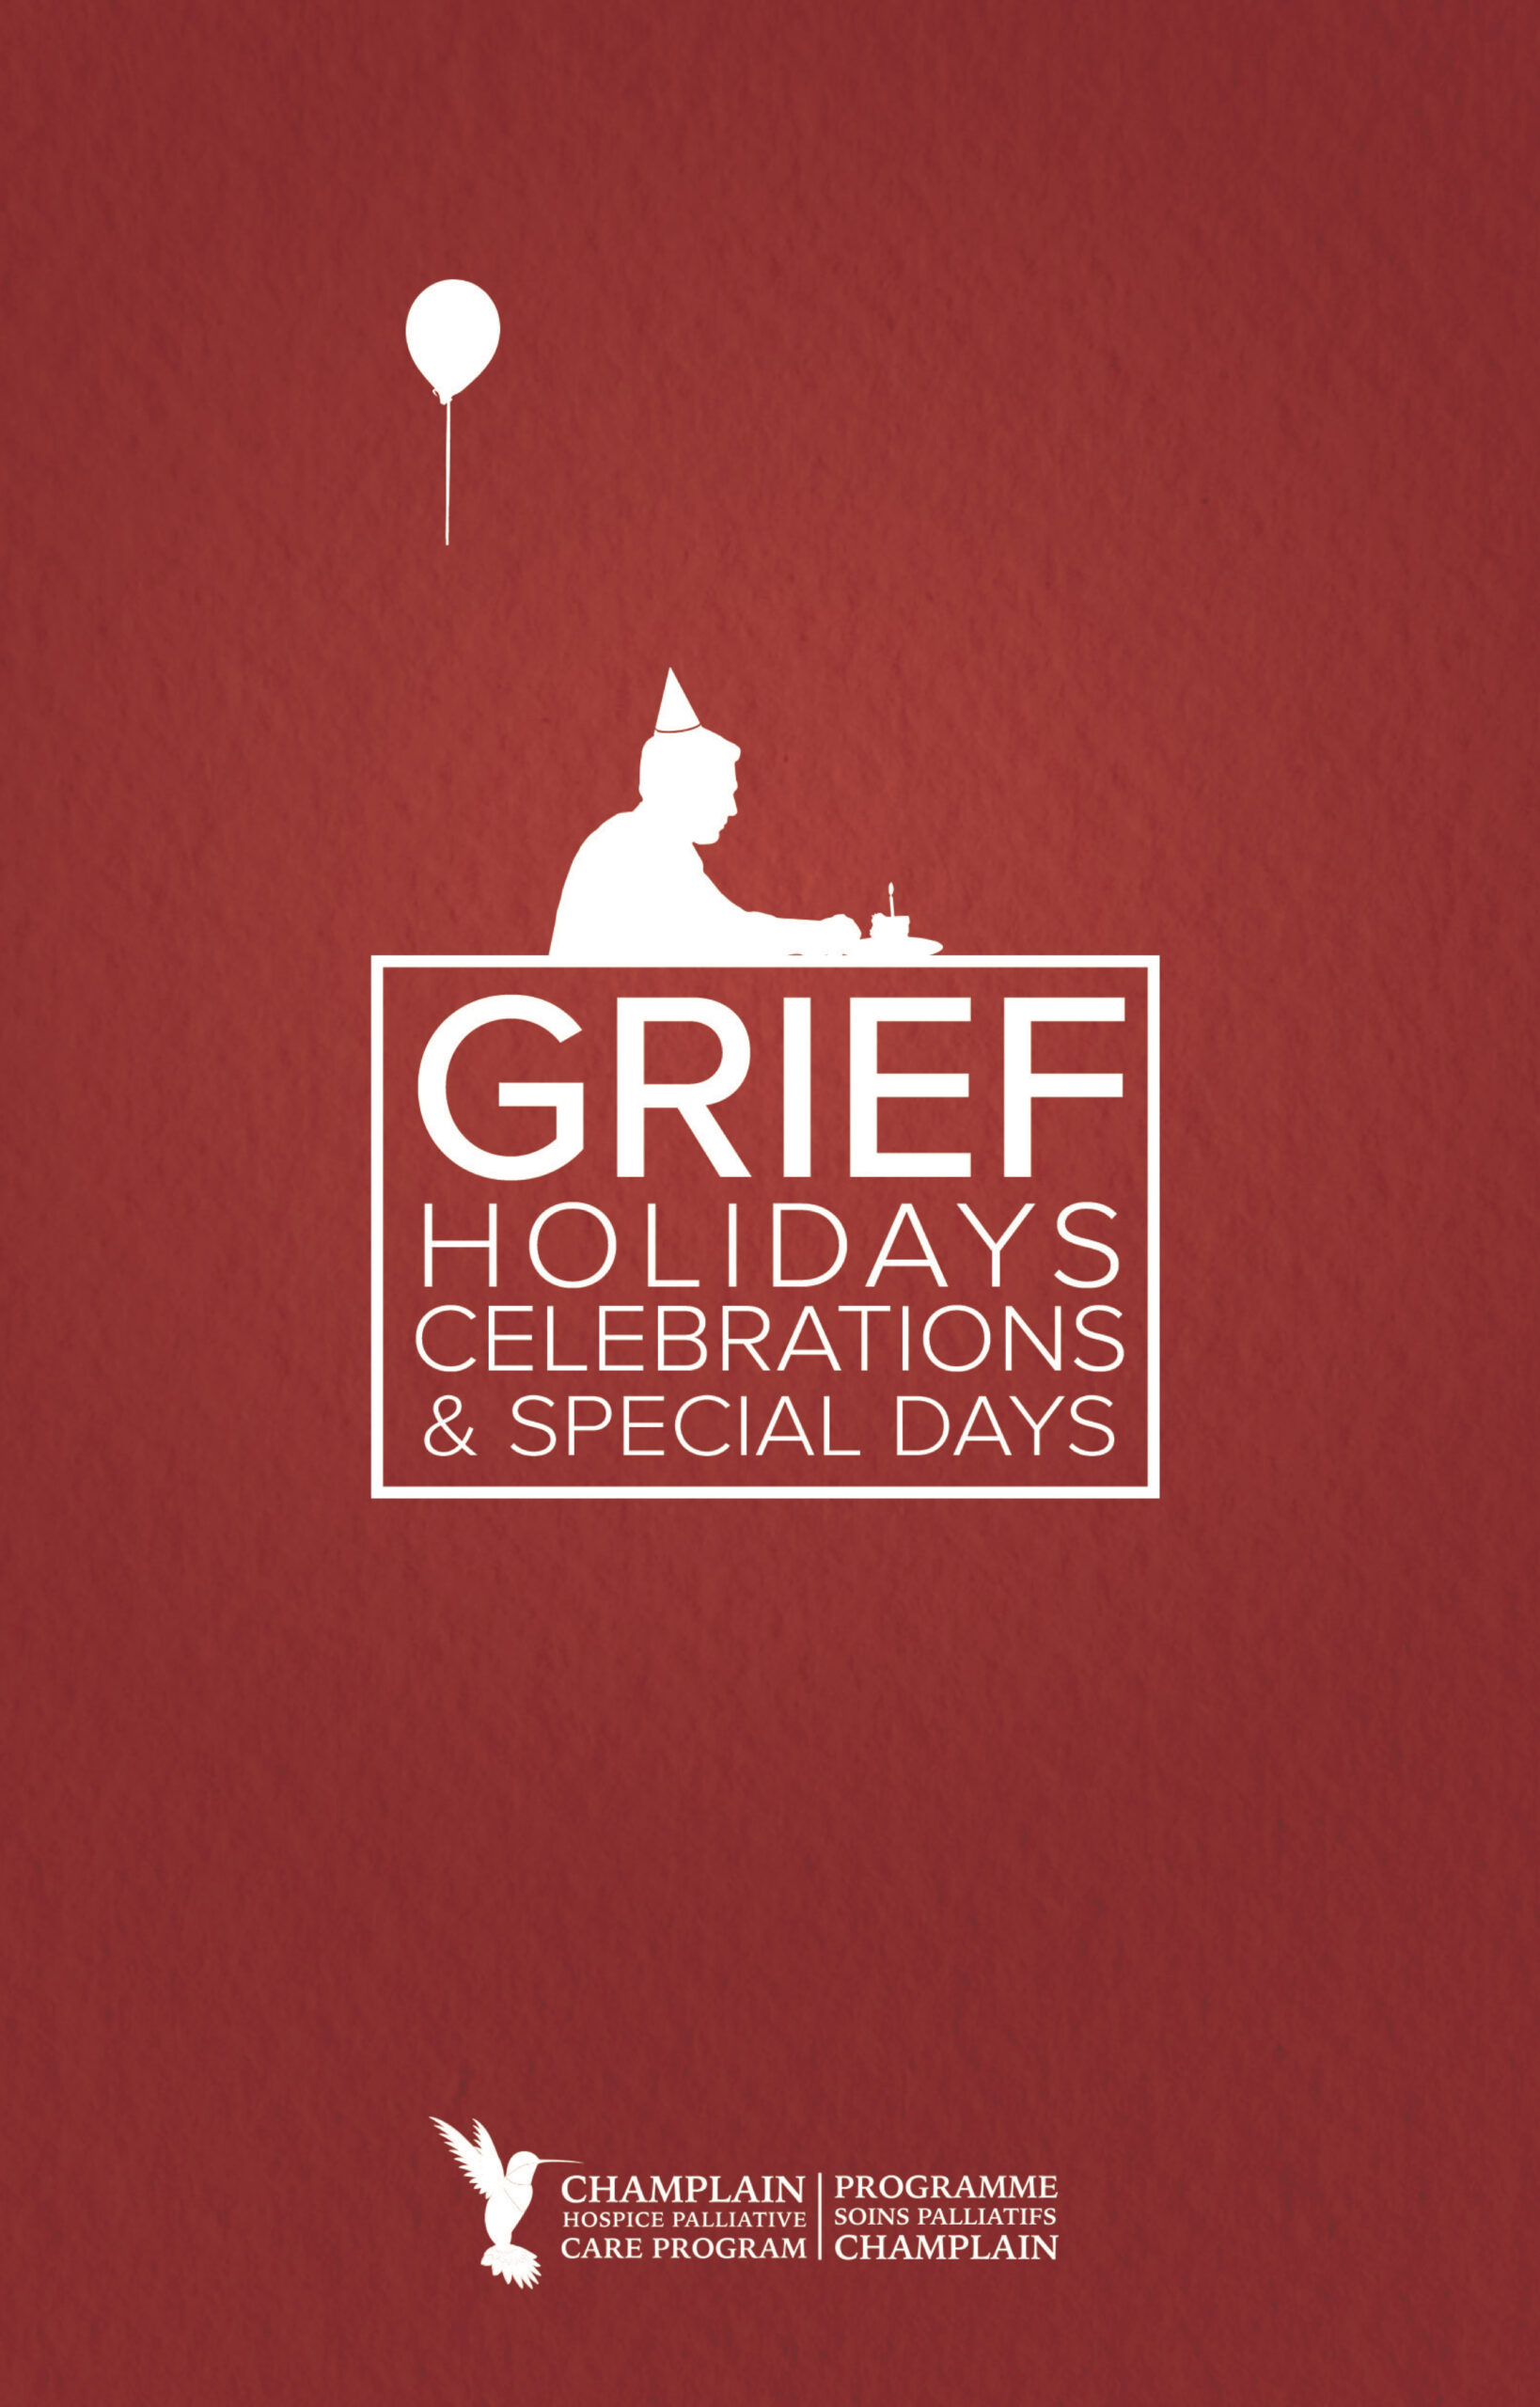 Document on grief during holidays, celebrations and special days